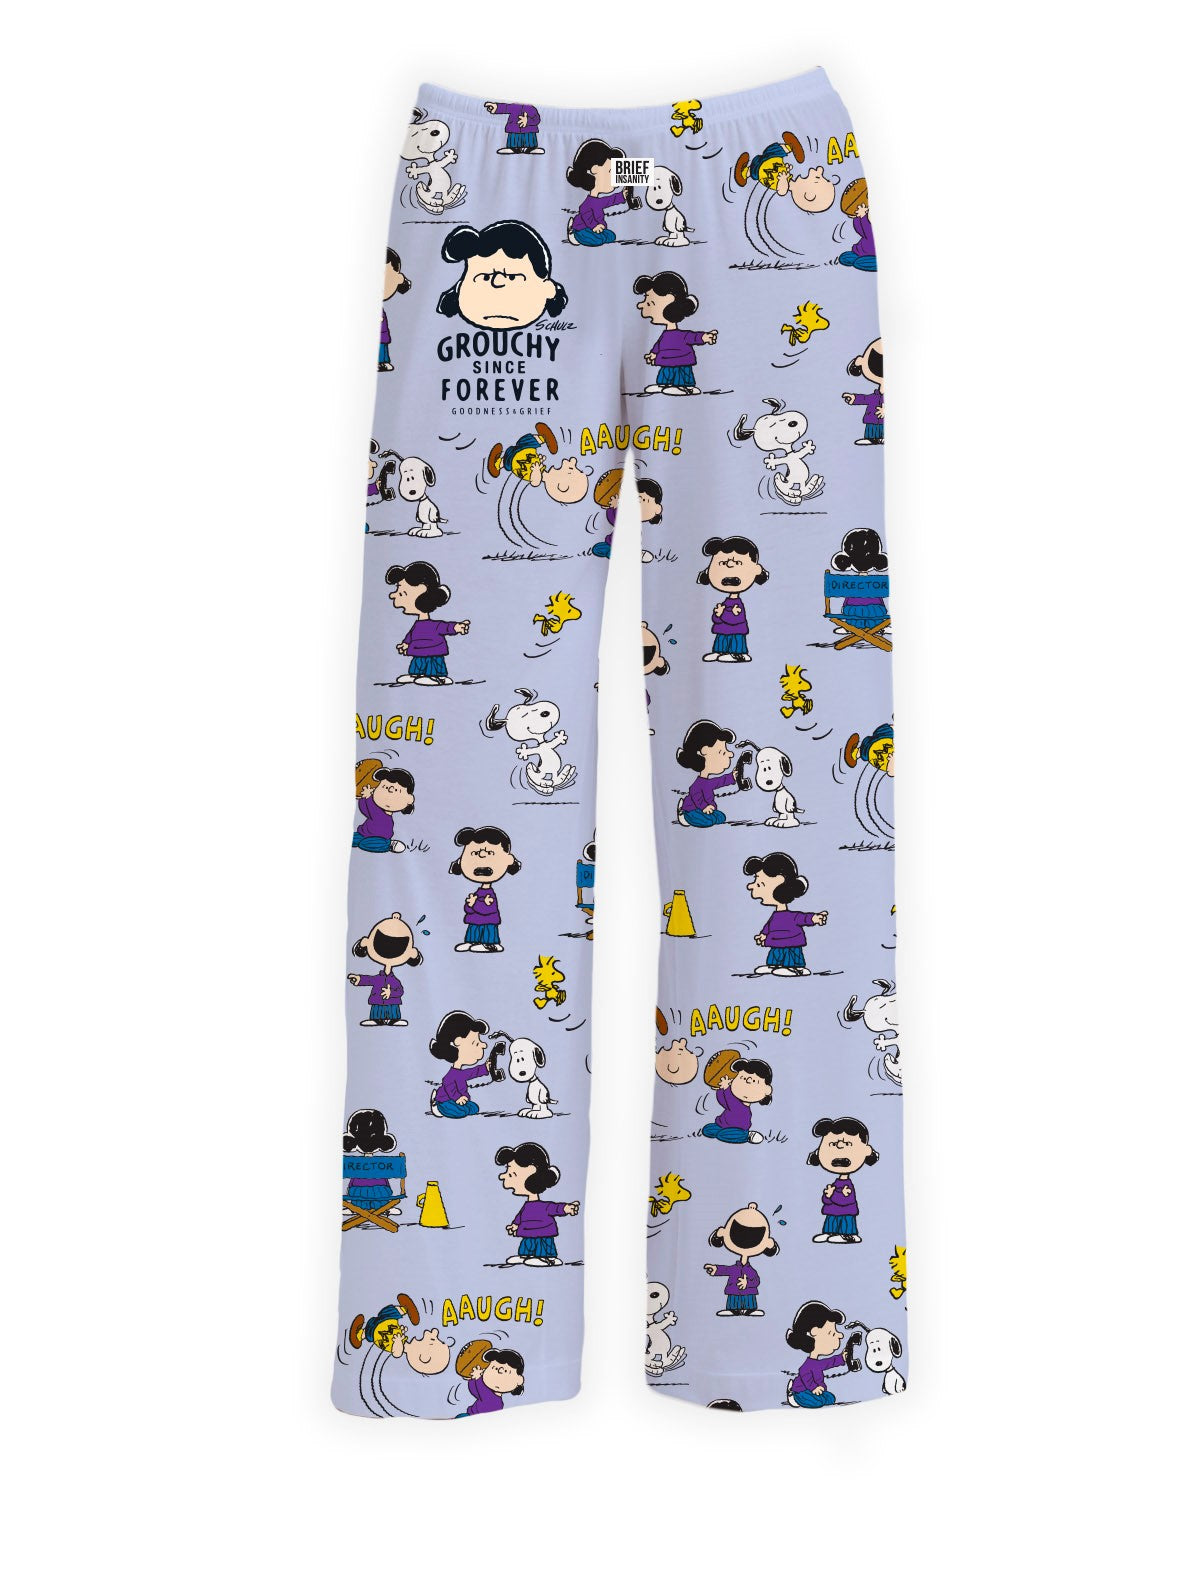 BRIEF INSANITY Grouchy Since Forever Peanuts Pajama Lounge Pants